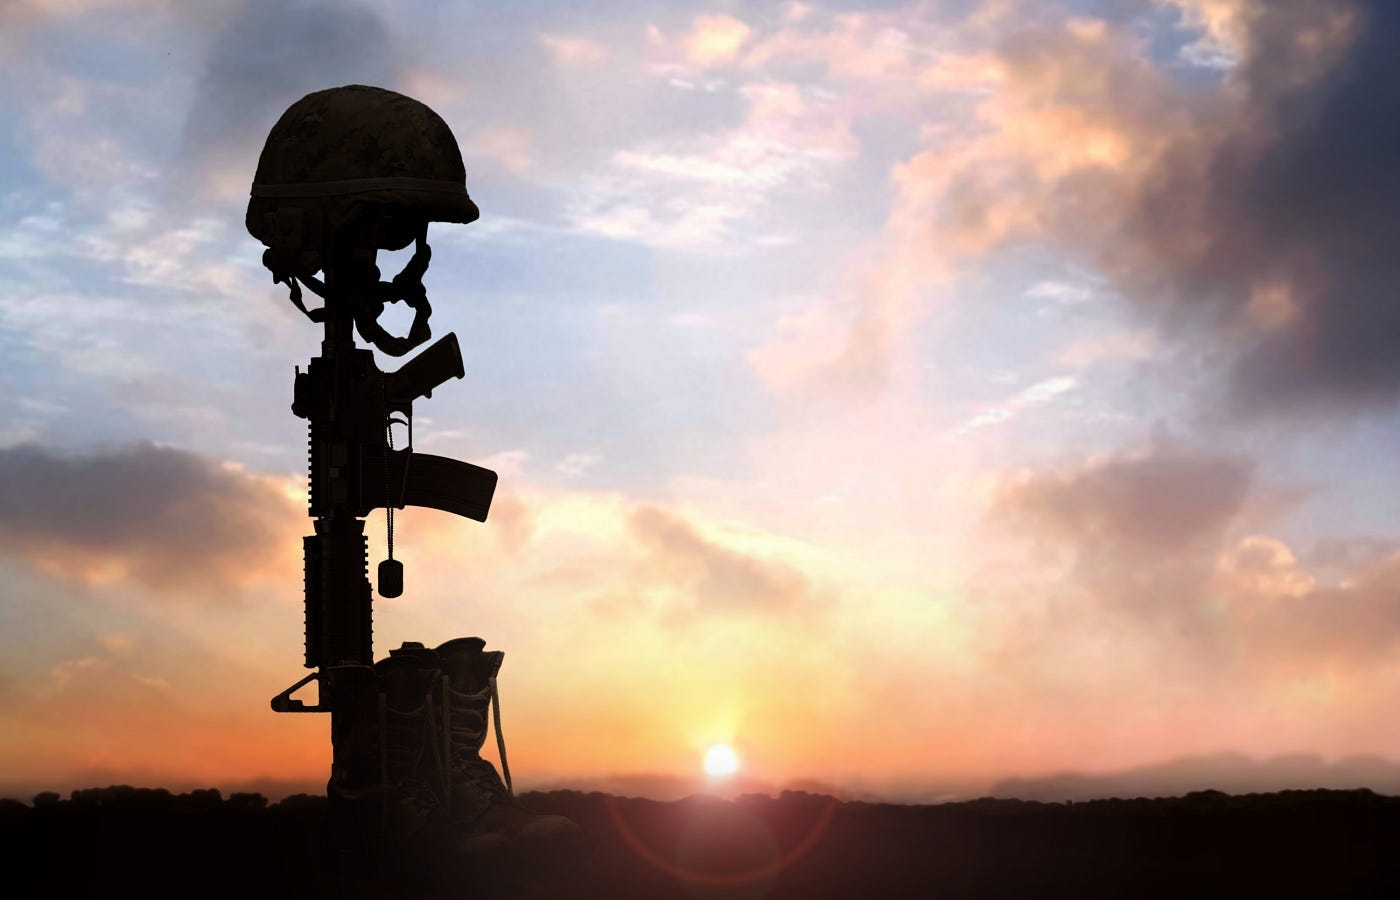 A dead soldier’s boots, rifle, dog tags, and helmet arranged as a standing memorial and silhouetted by the setting sun